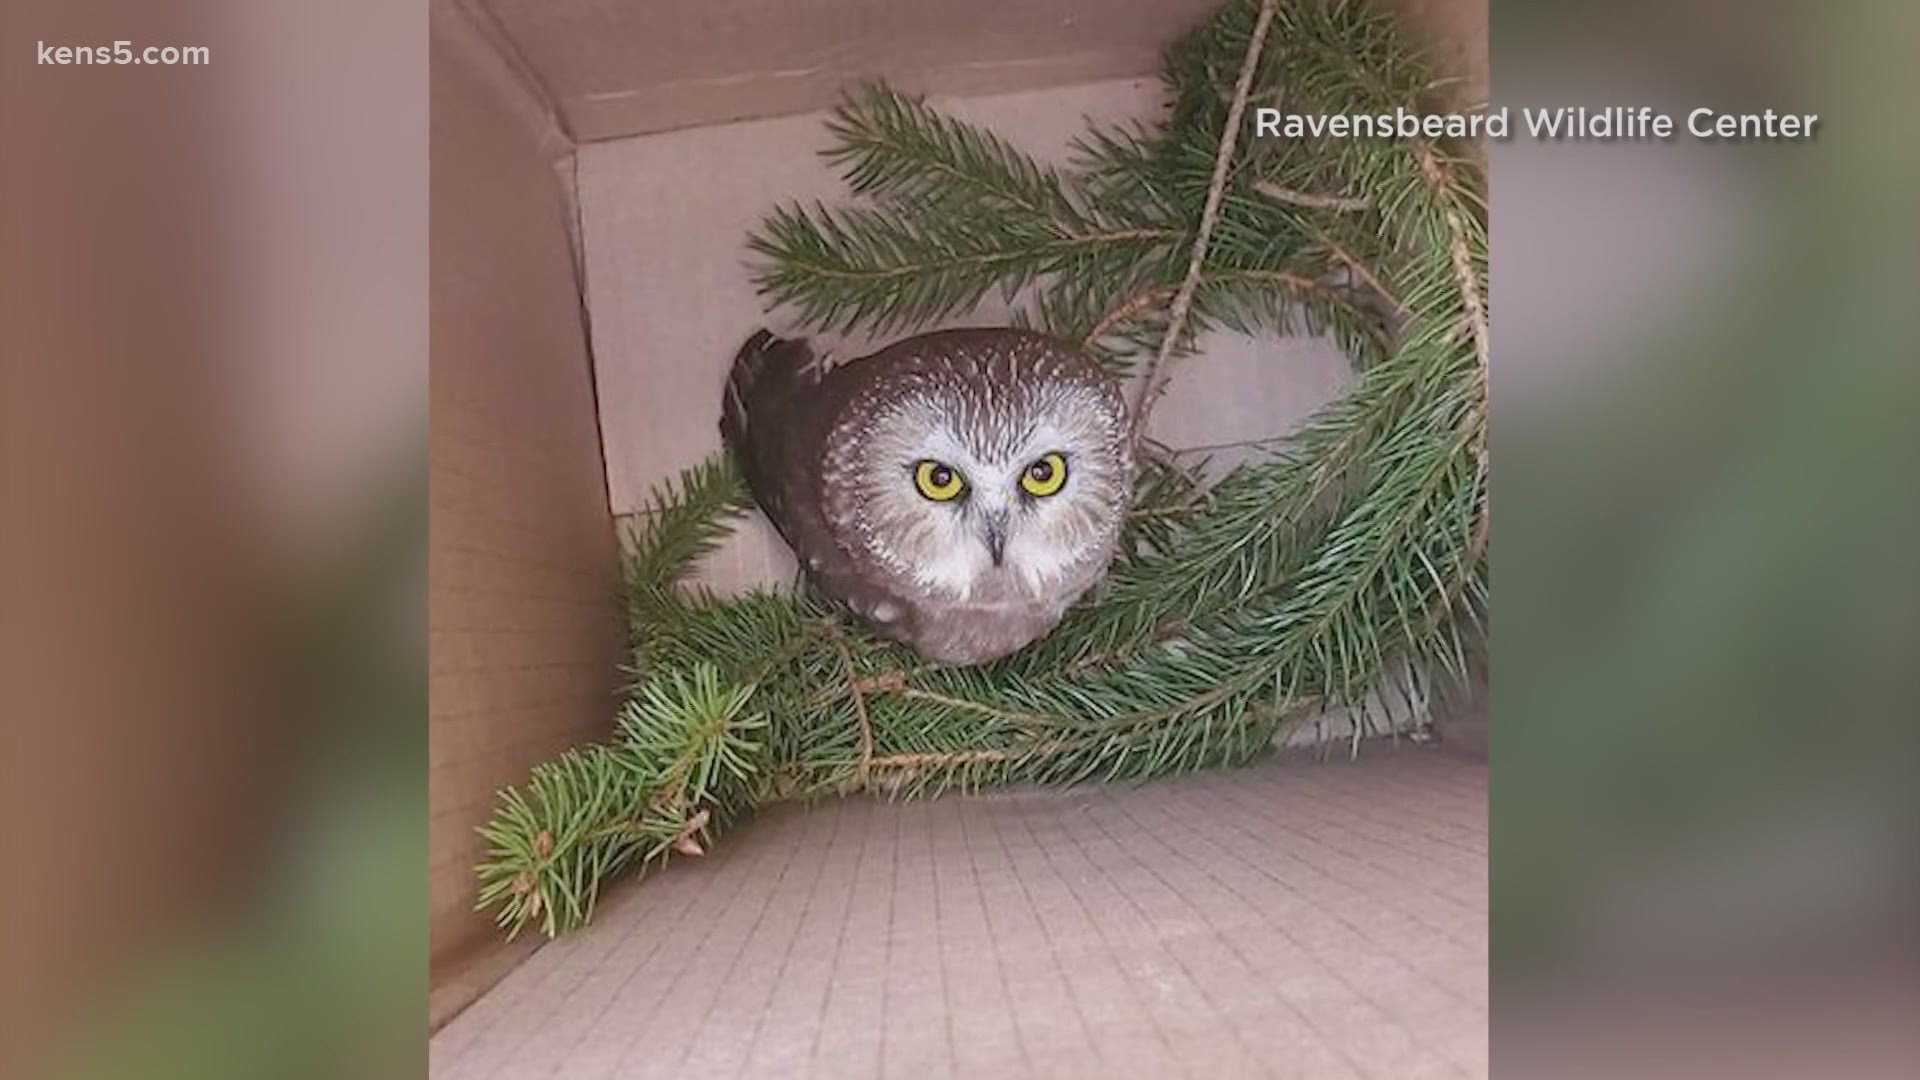 A baby owl was rescued from one of the most well known Christmas trees in the country.